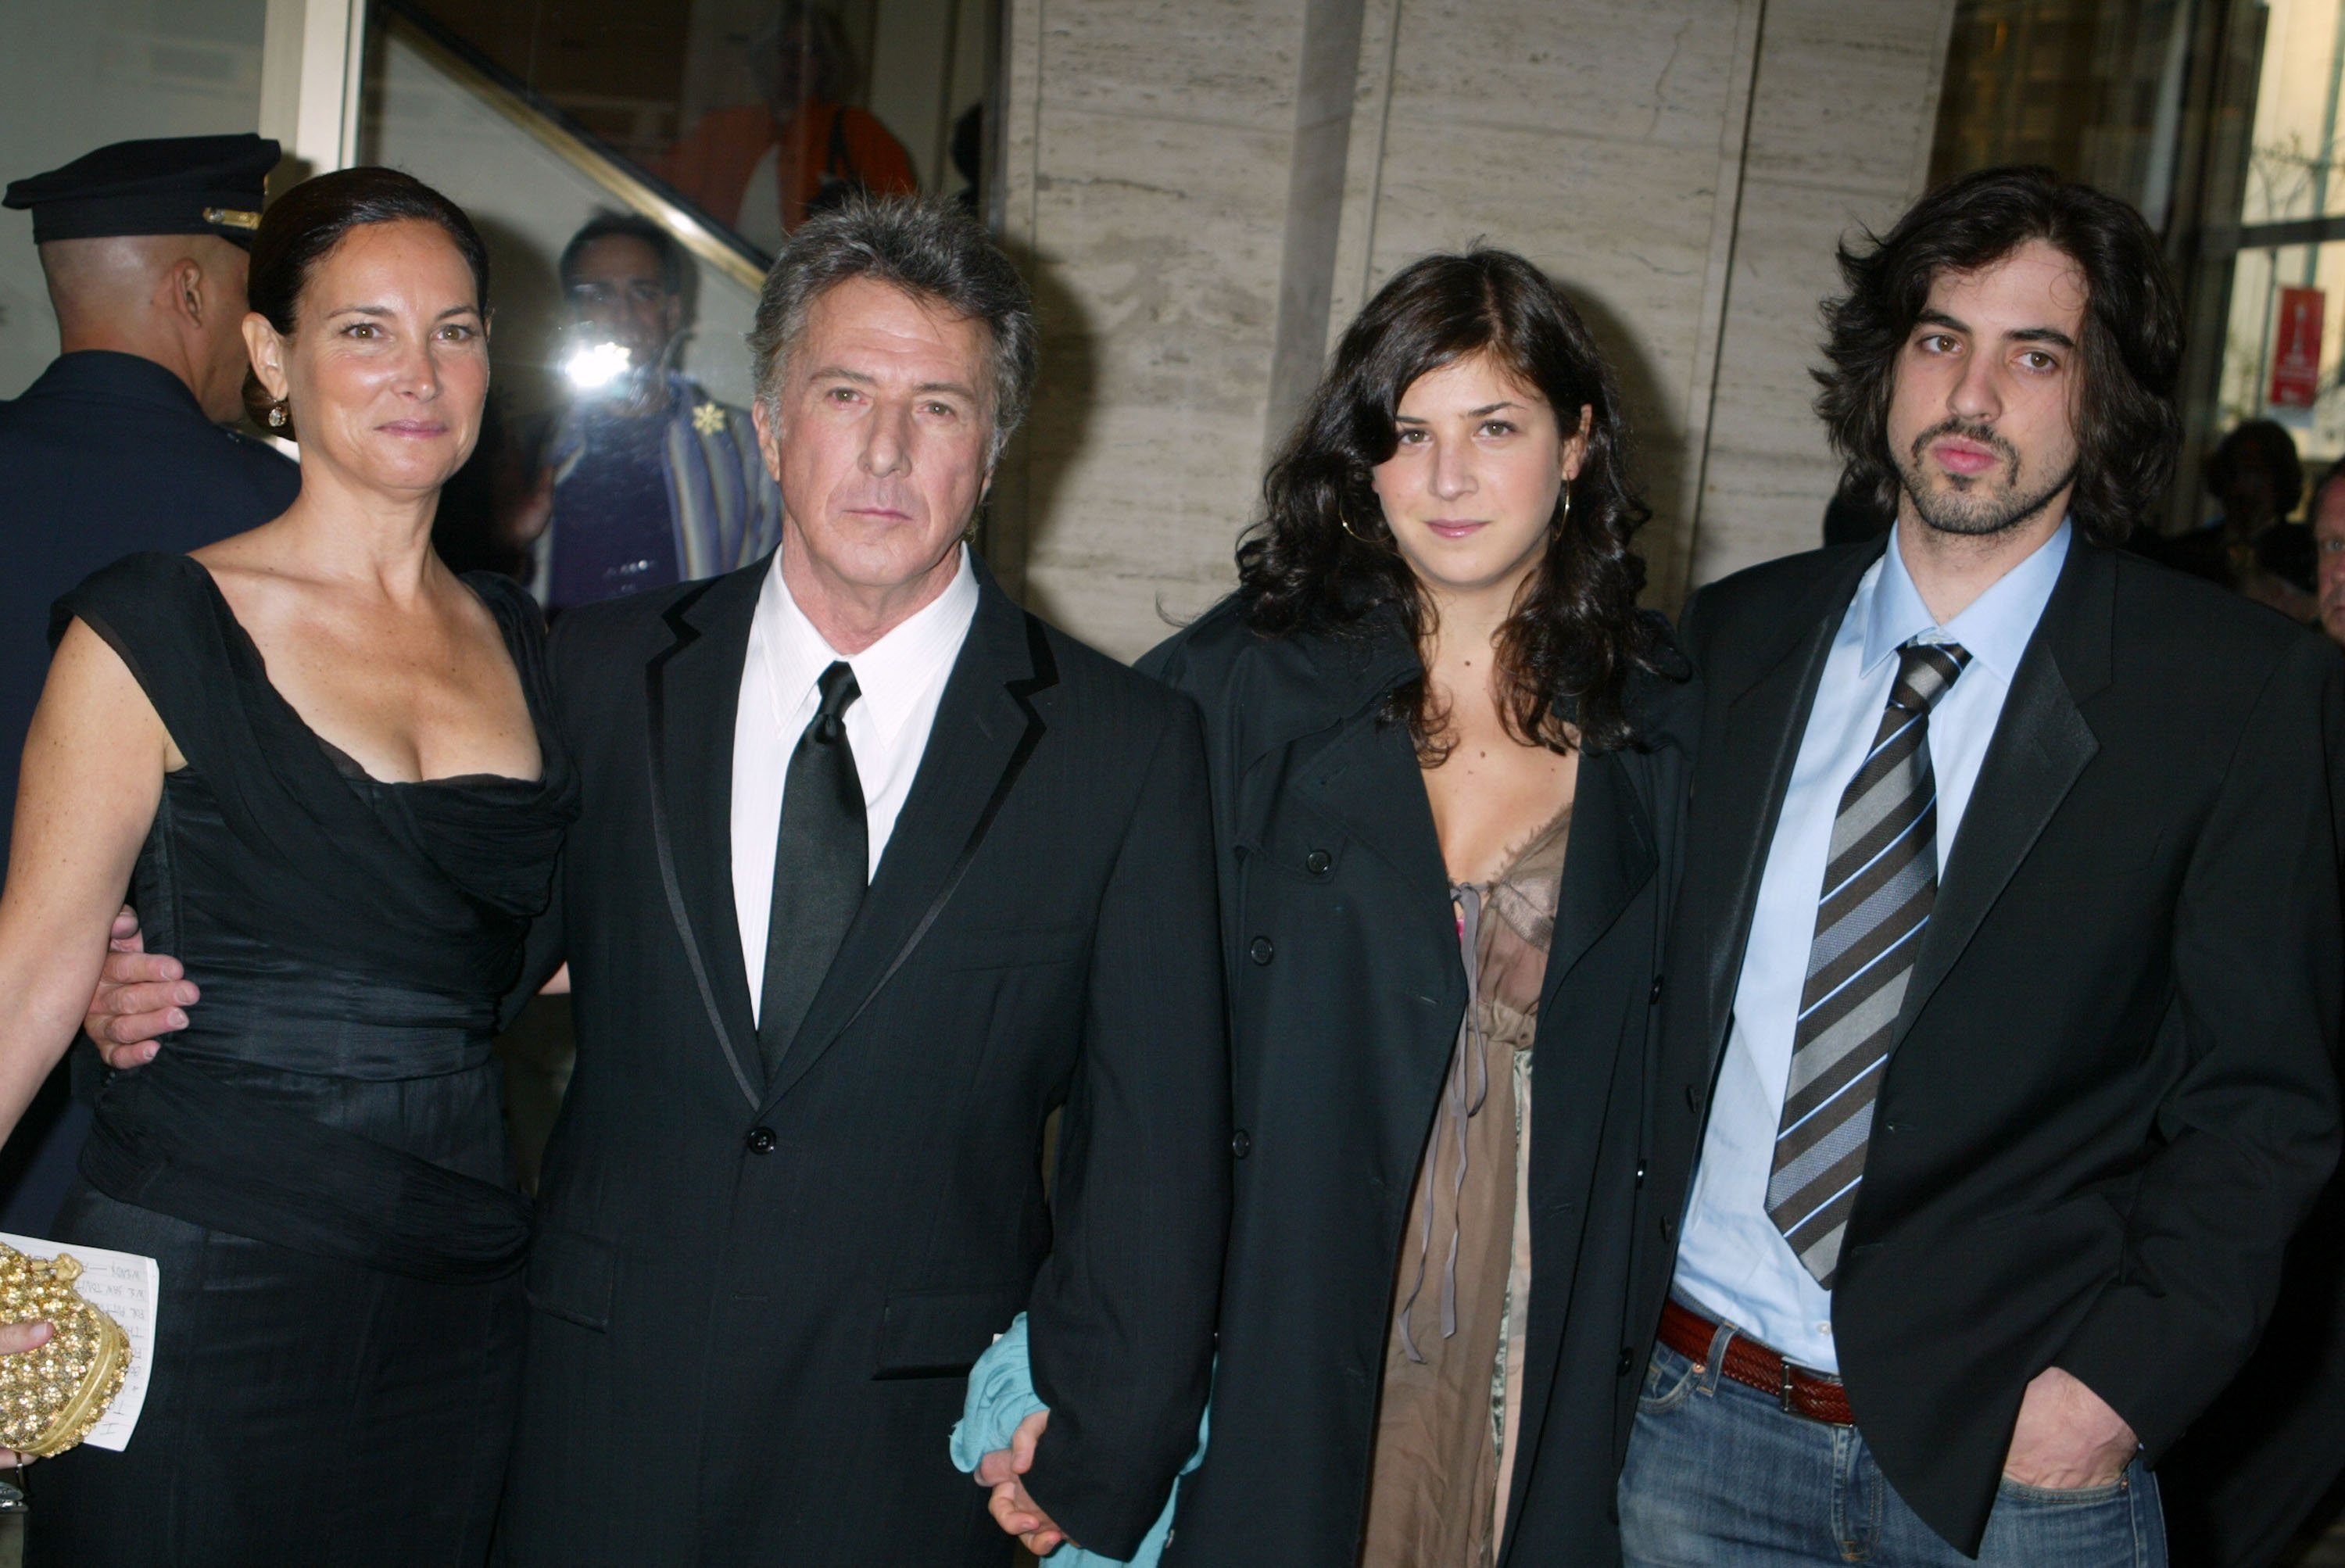 Lisa Hoffman, Dustin Hoffman, daughter Becky Hoffman and guest April 18, 2005. | Source: Getty Images 